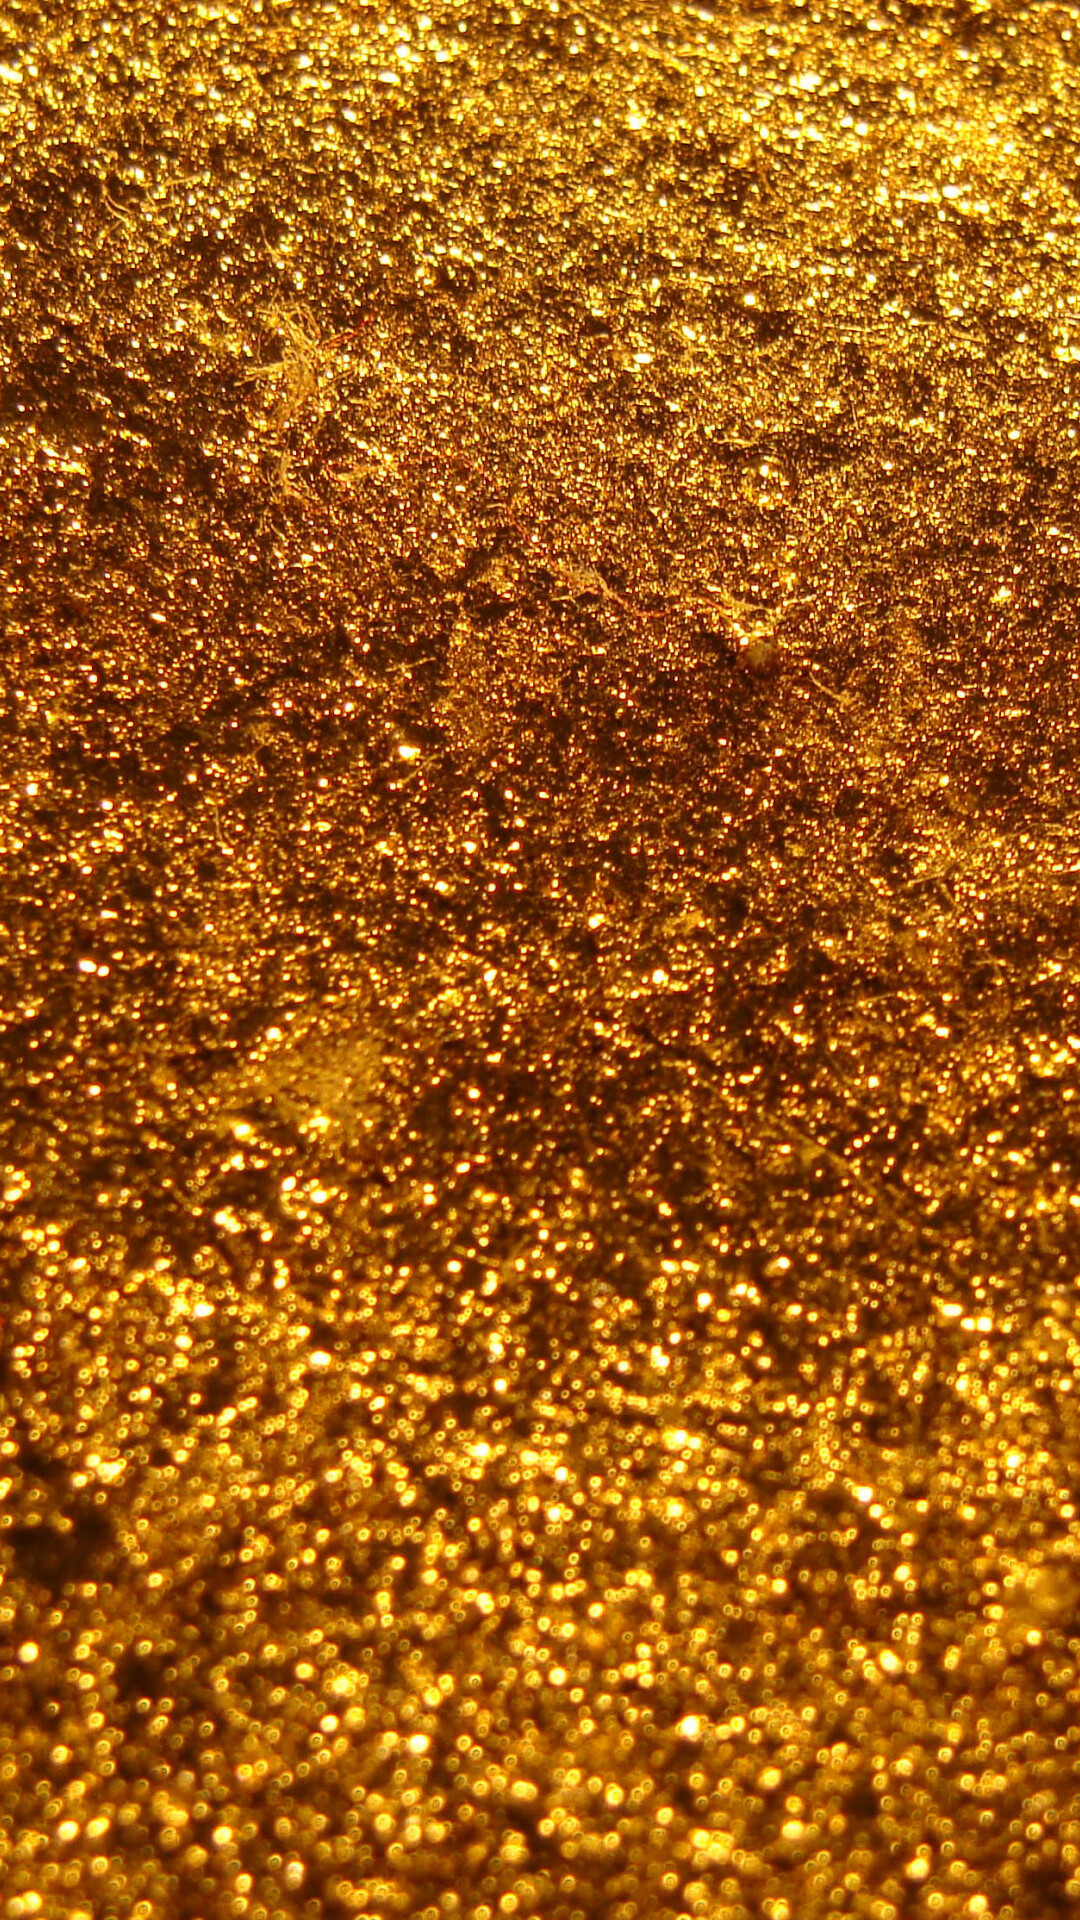 Gold Glitter: Slightly reddish yellow particles - the powder made of the pure 24 karat metal. 1080x1920 Full HD Background.